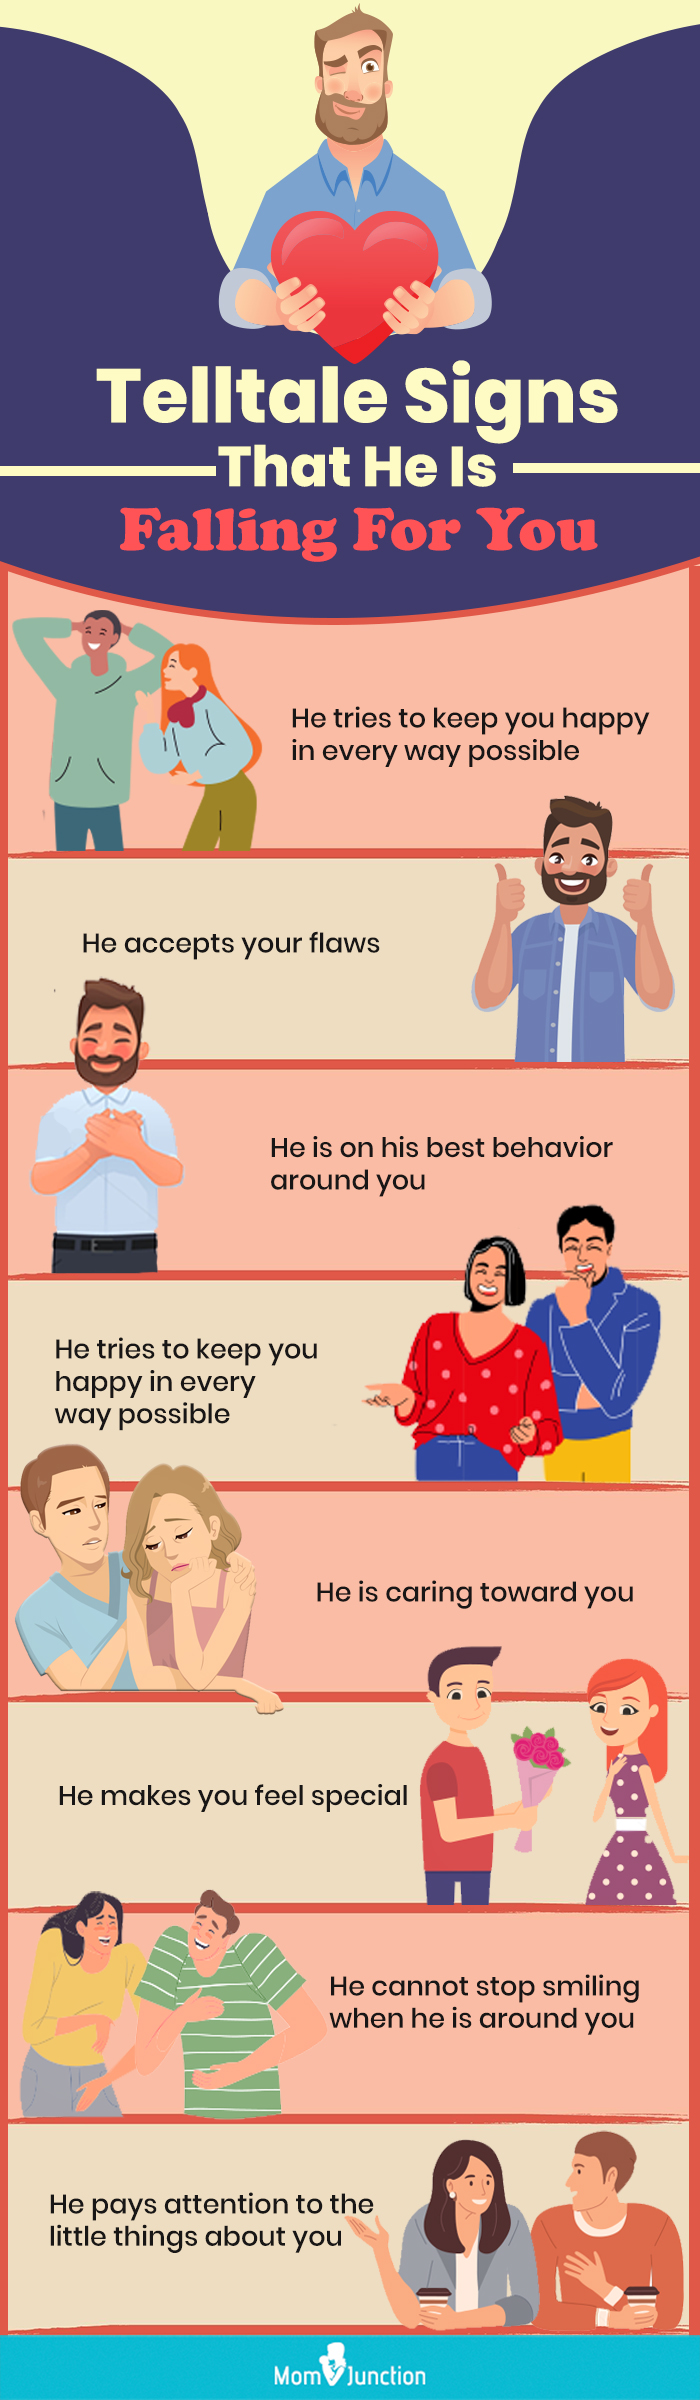 How Do You Know If Someone is in Love?: Telltale Signs